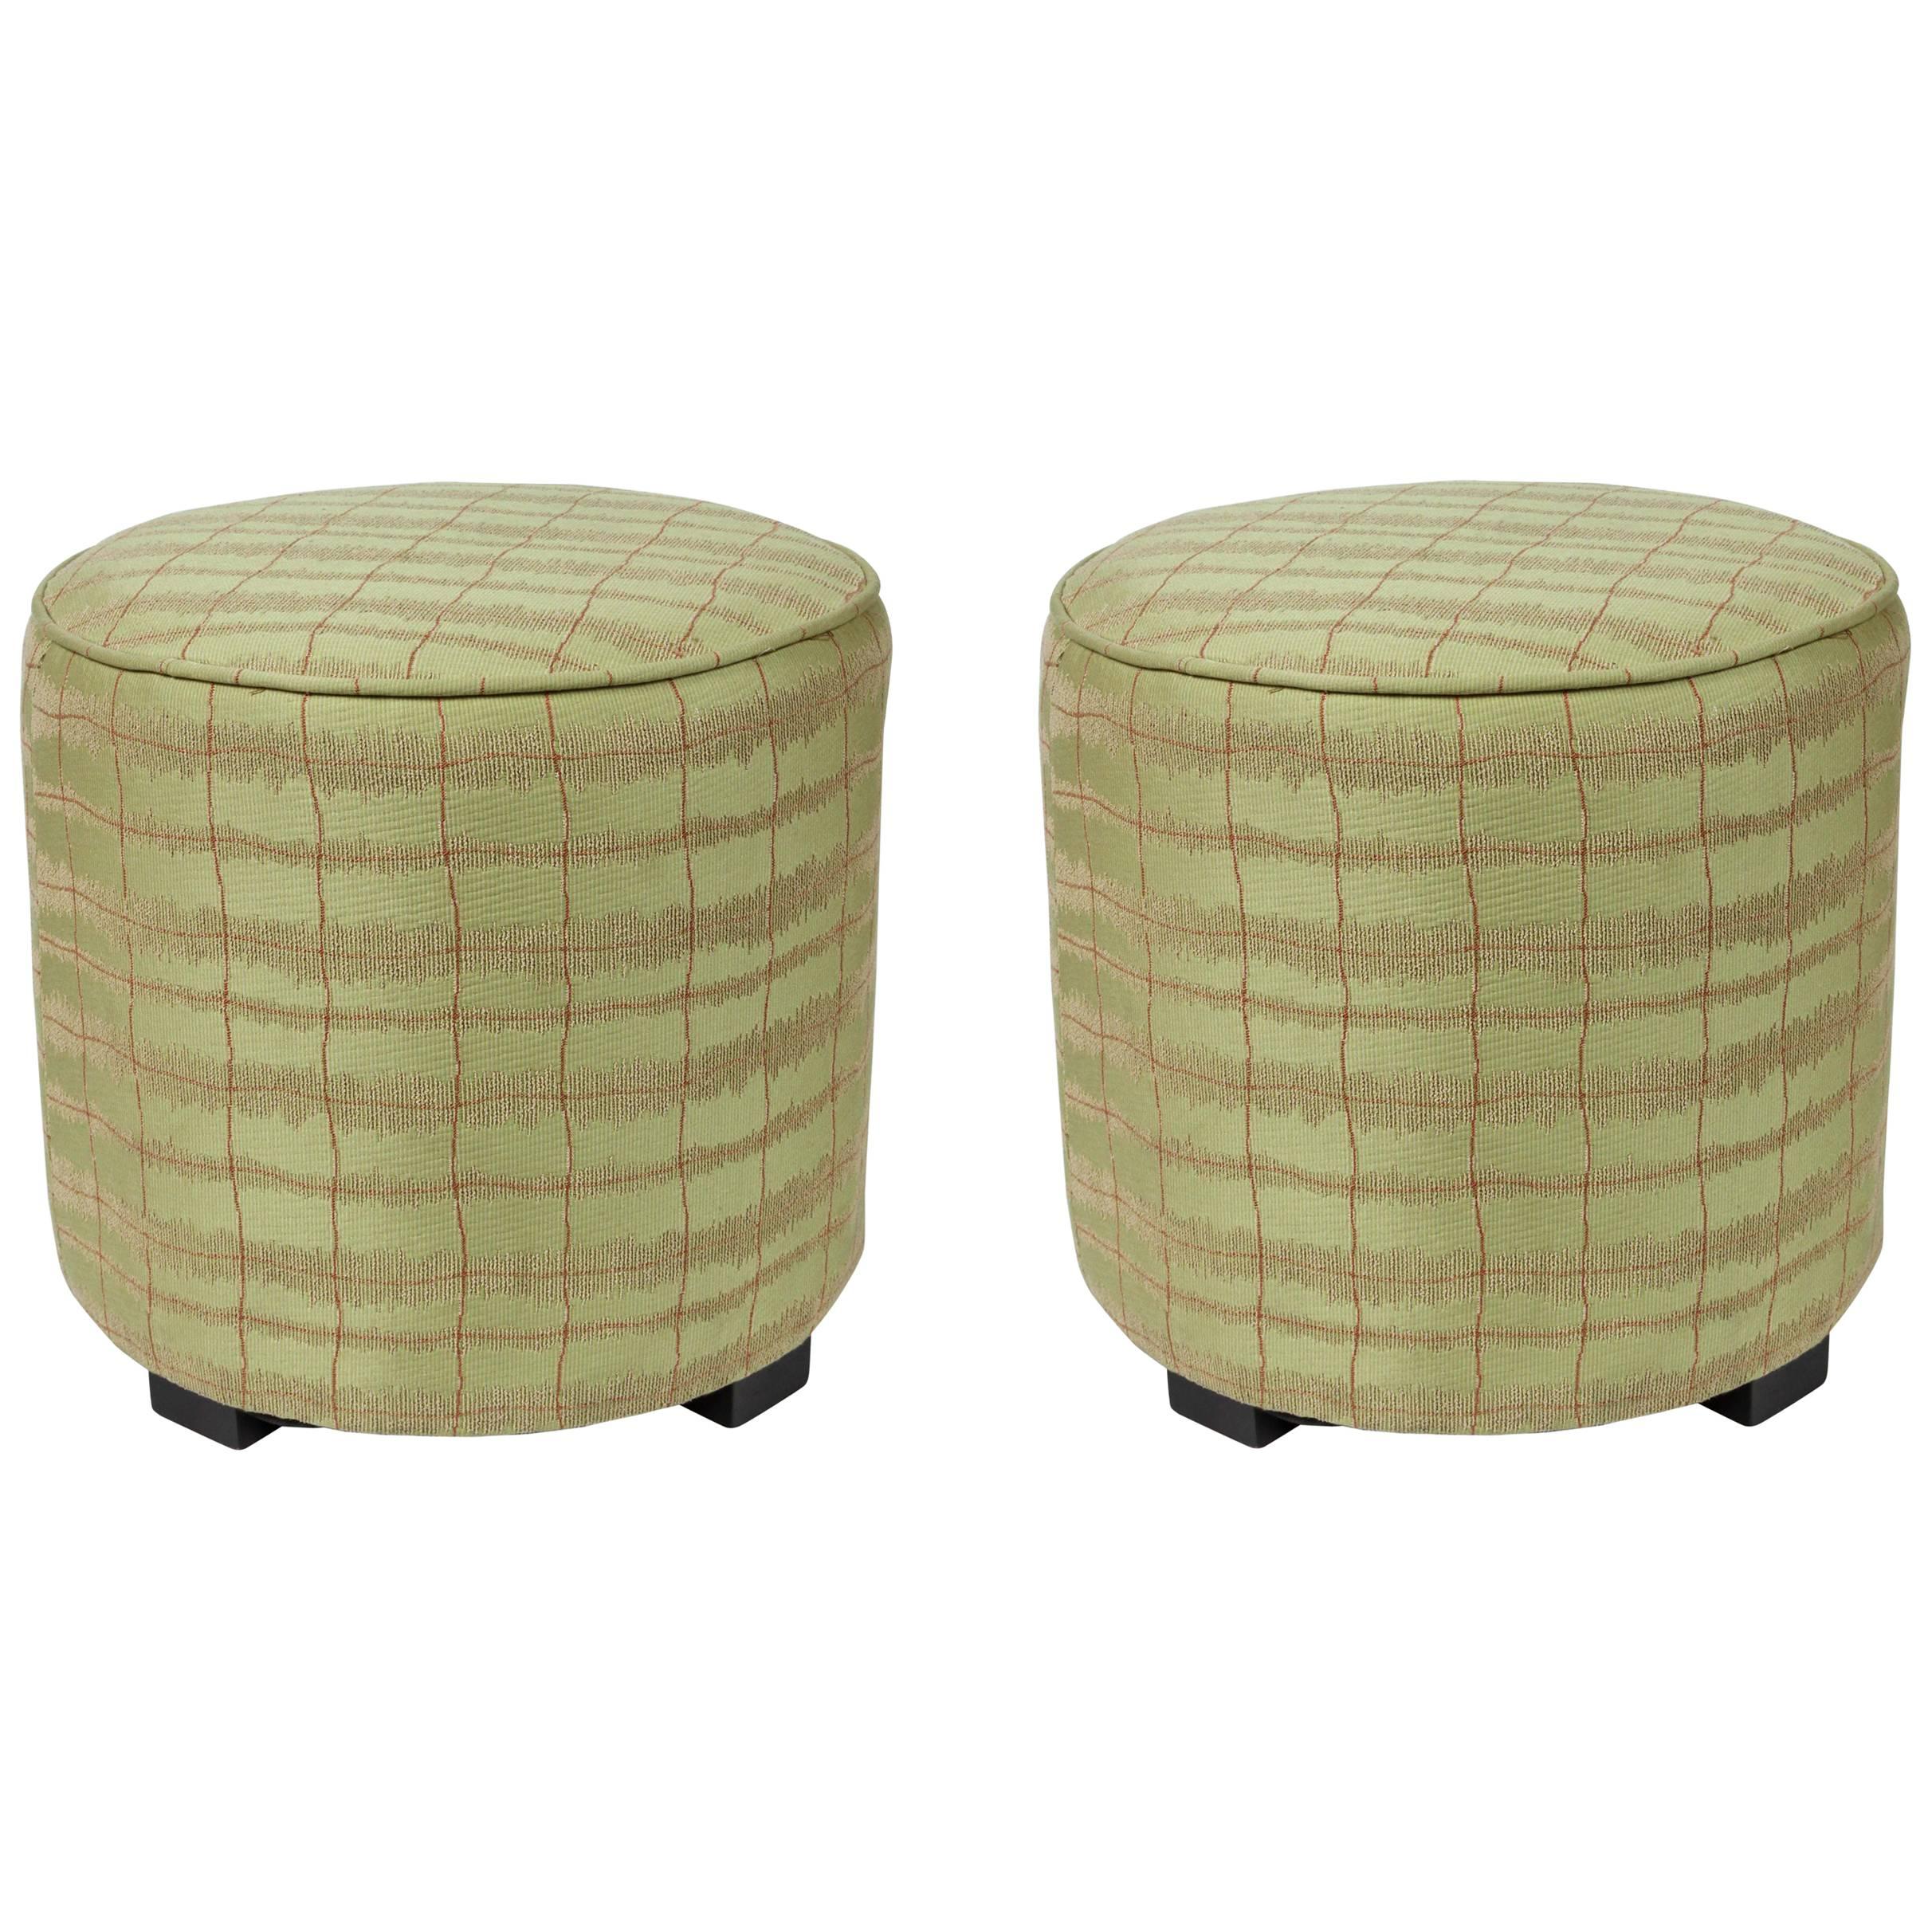 Pair of Vintage Art Deco Style Green Moroccan Upholstered Stools For Sale